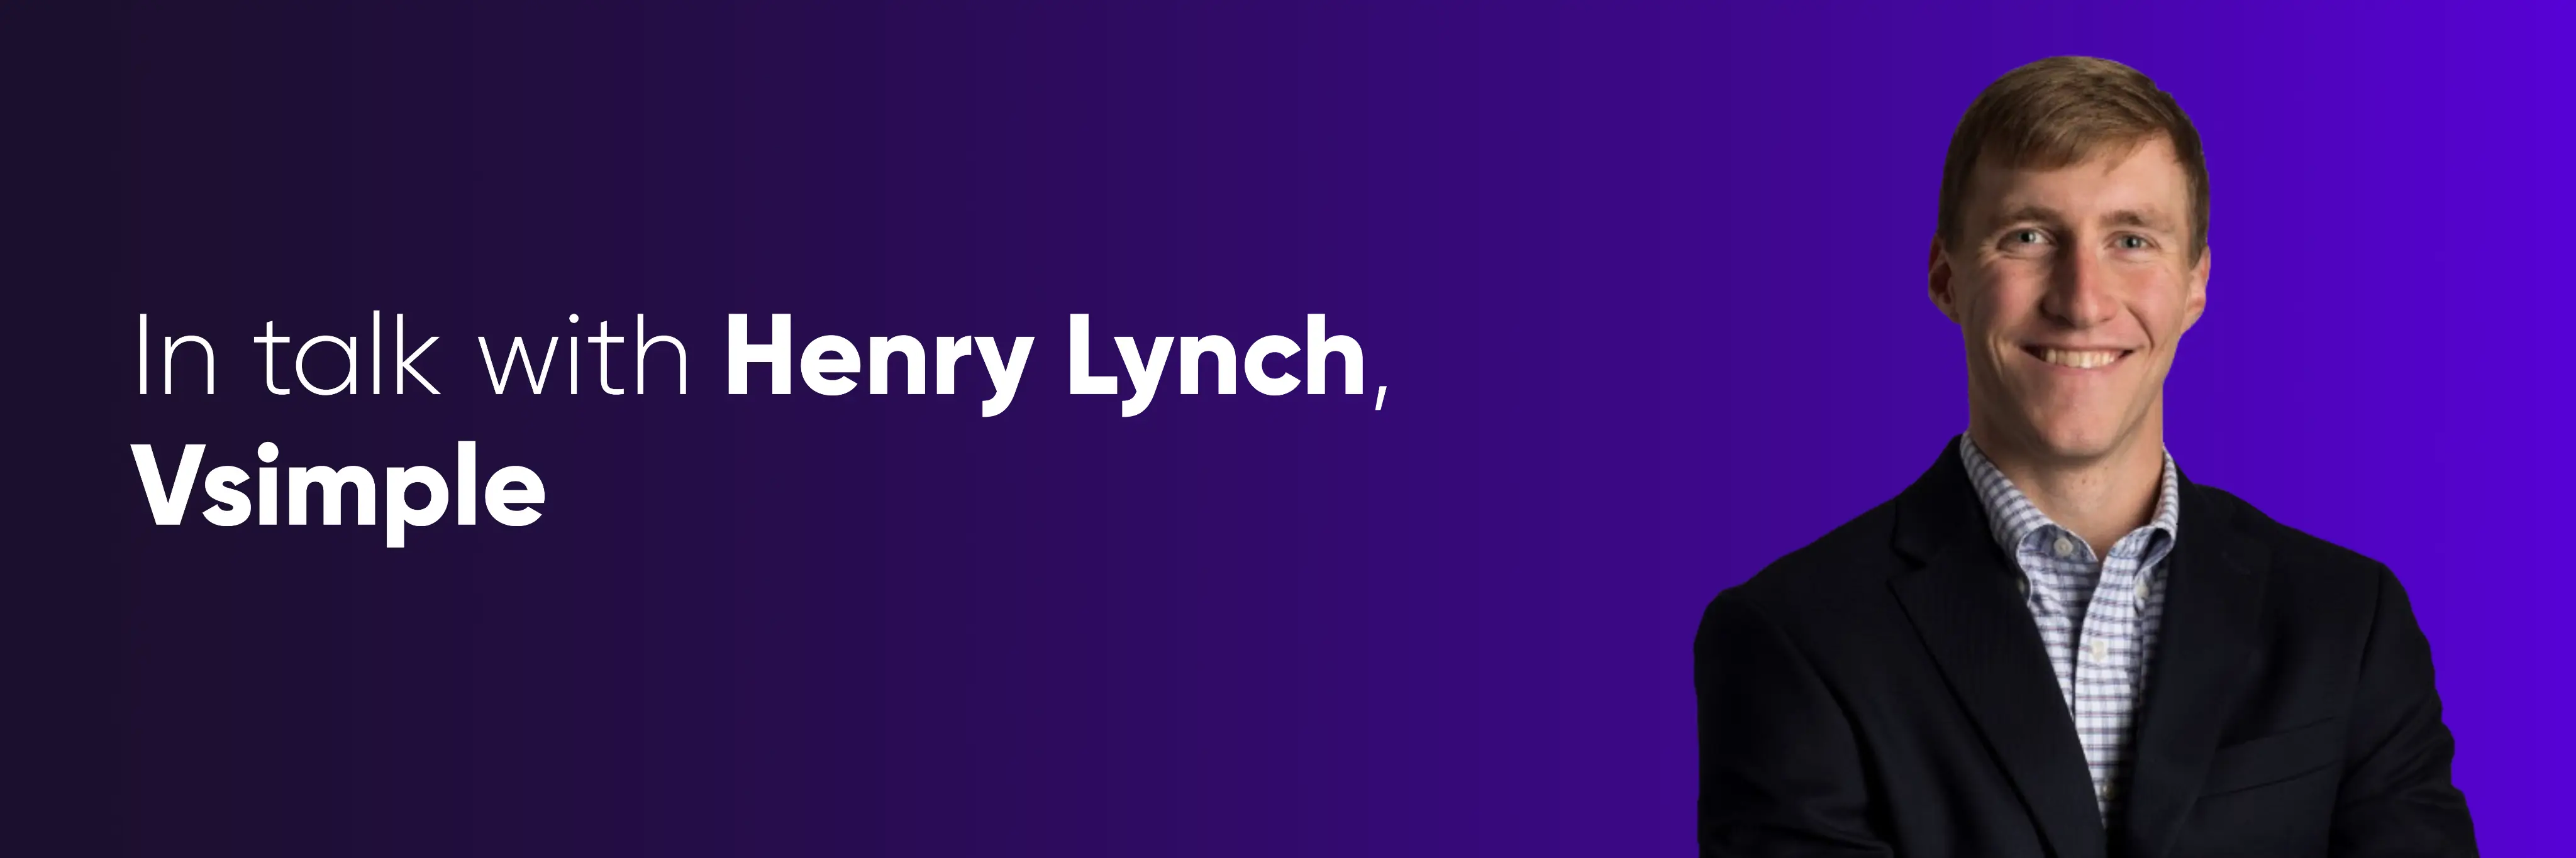 Henry Lynch, the co-founder and VP of Product of Vsimple, talks about his CRM workflows and how he leverages Chatwoot.